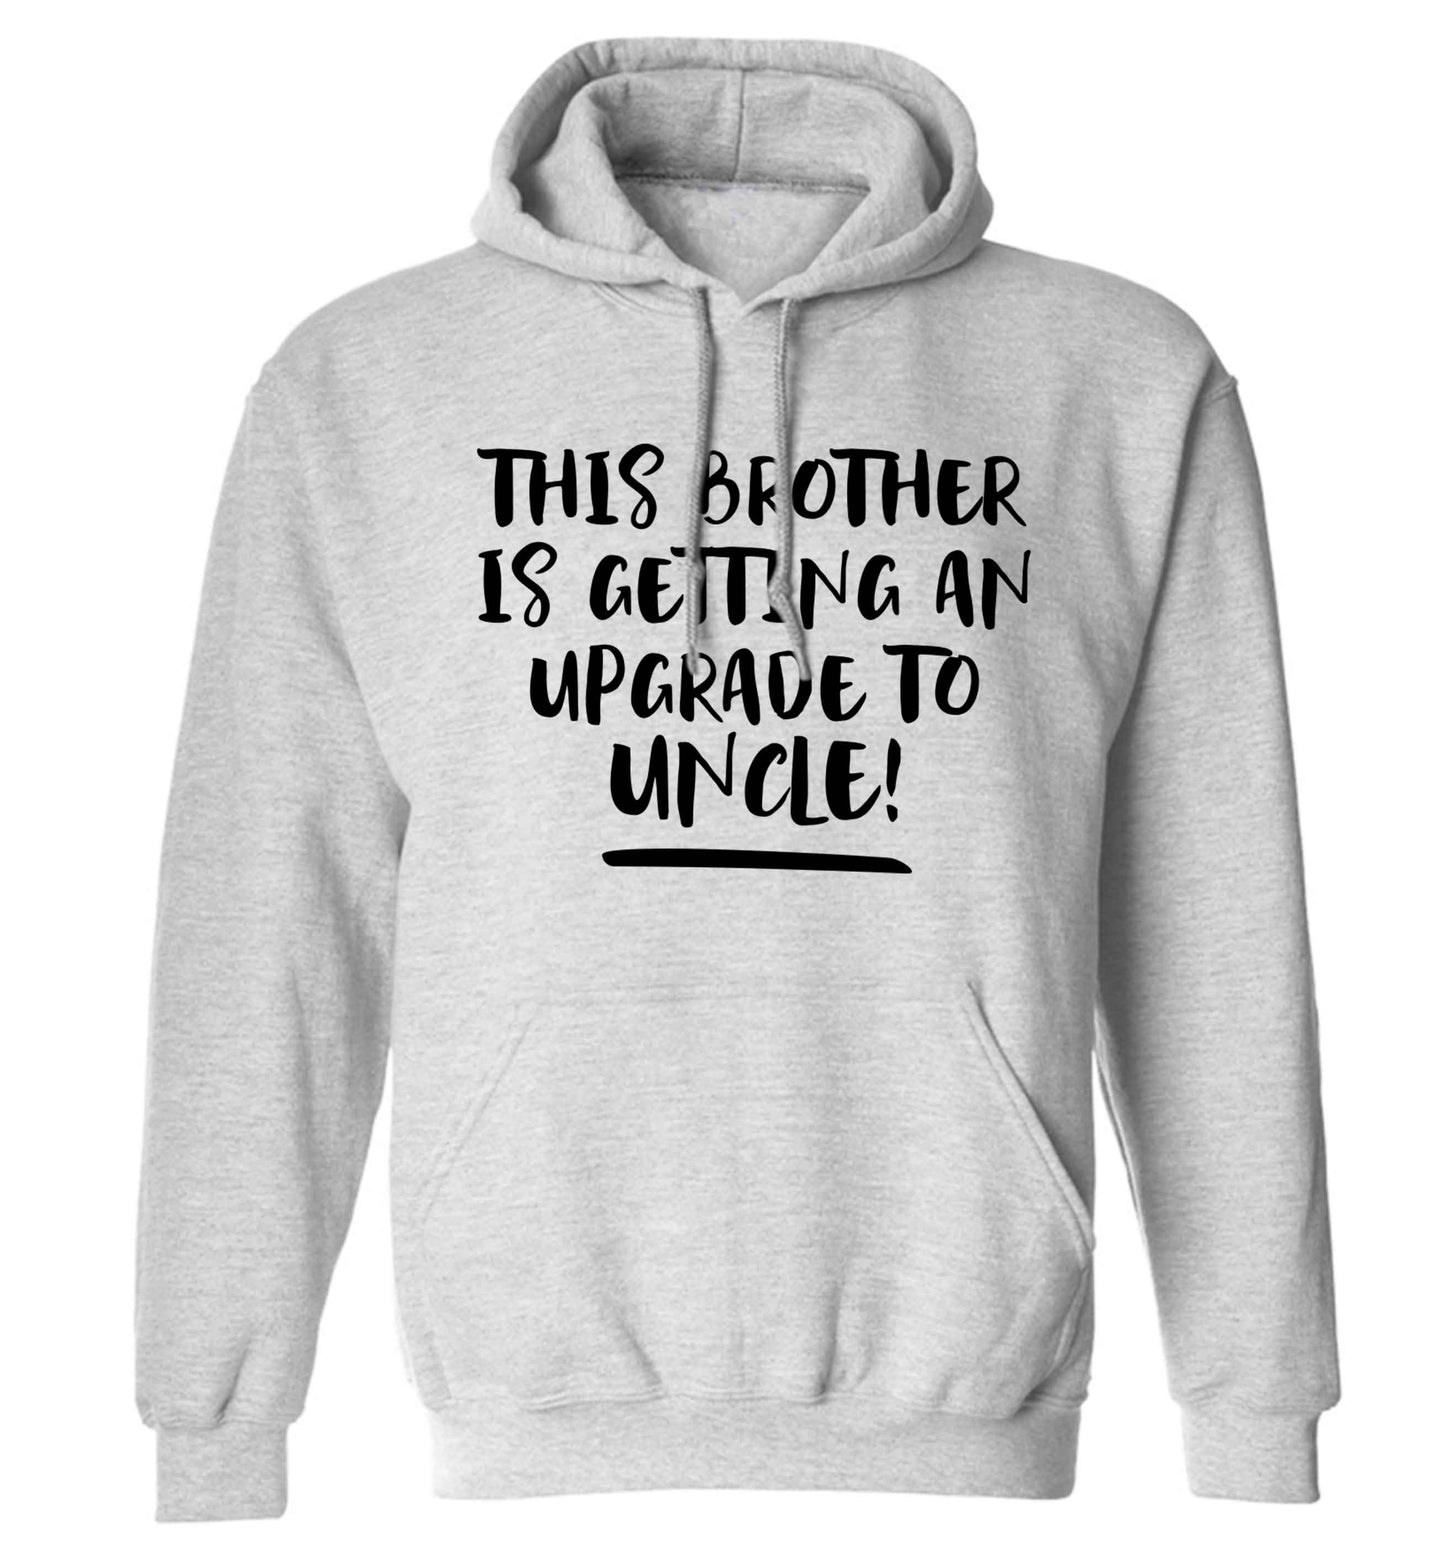 This brother is getting an upgrade to uncle! adults unisex grey hoodie 2XL